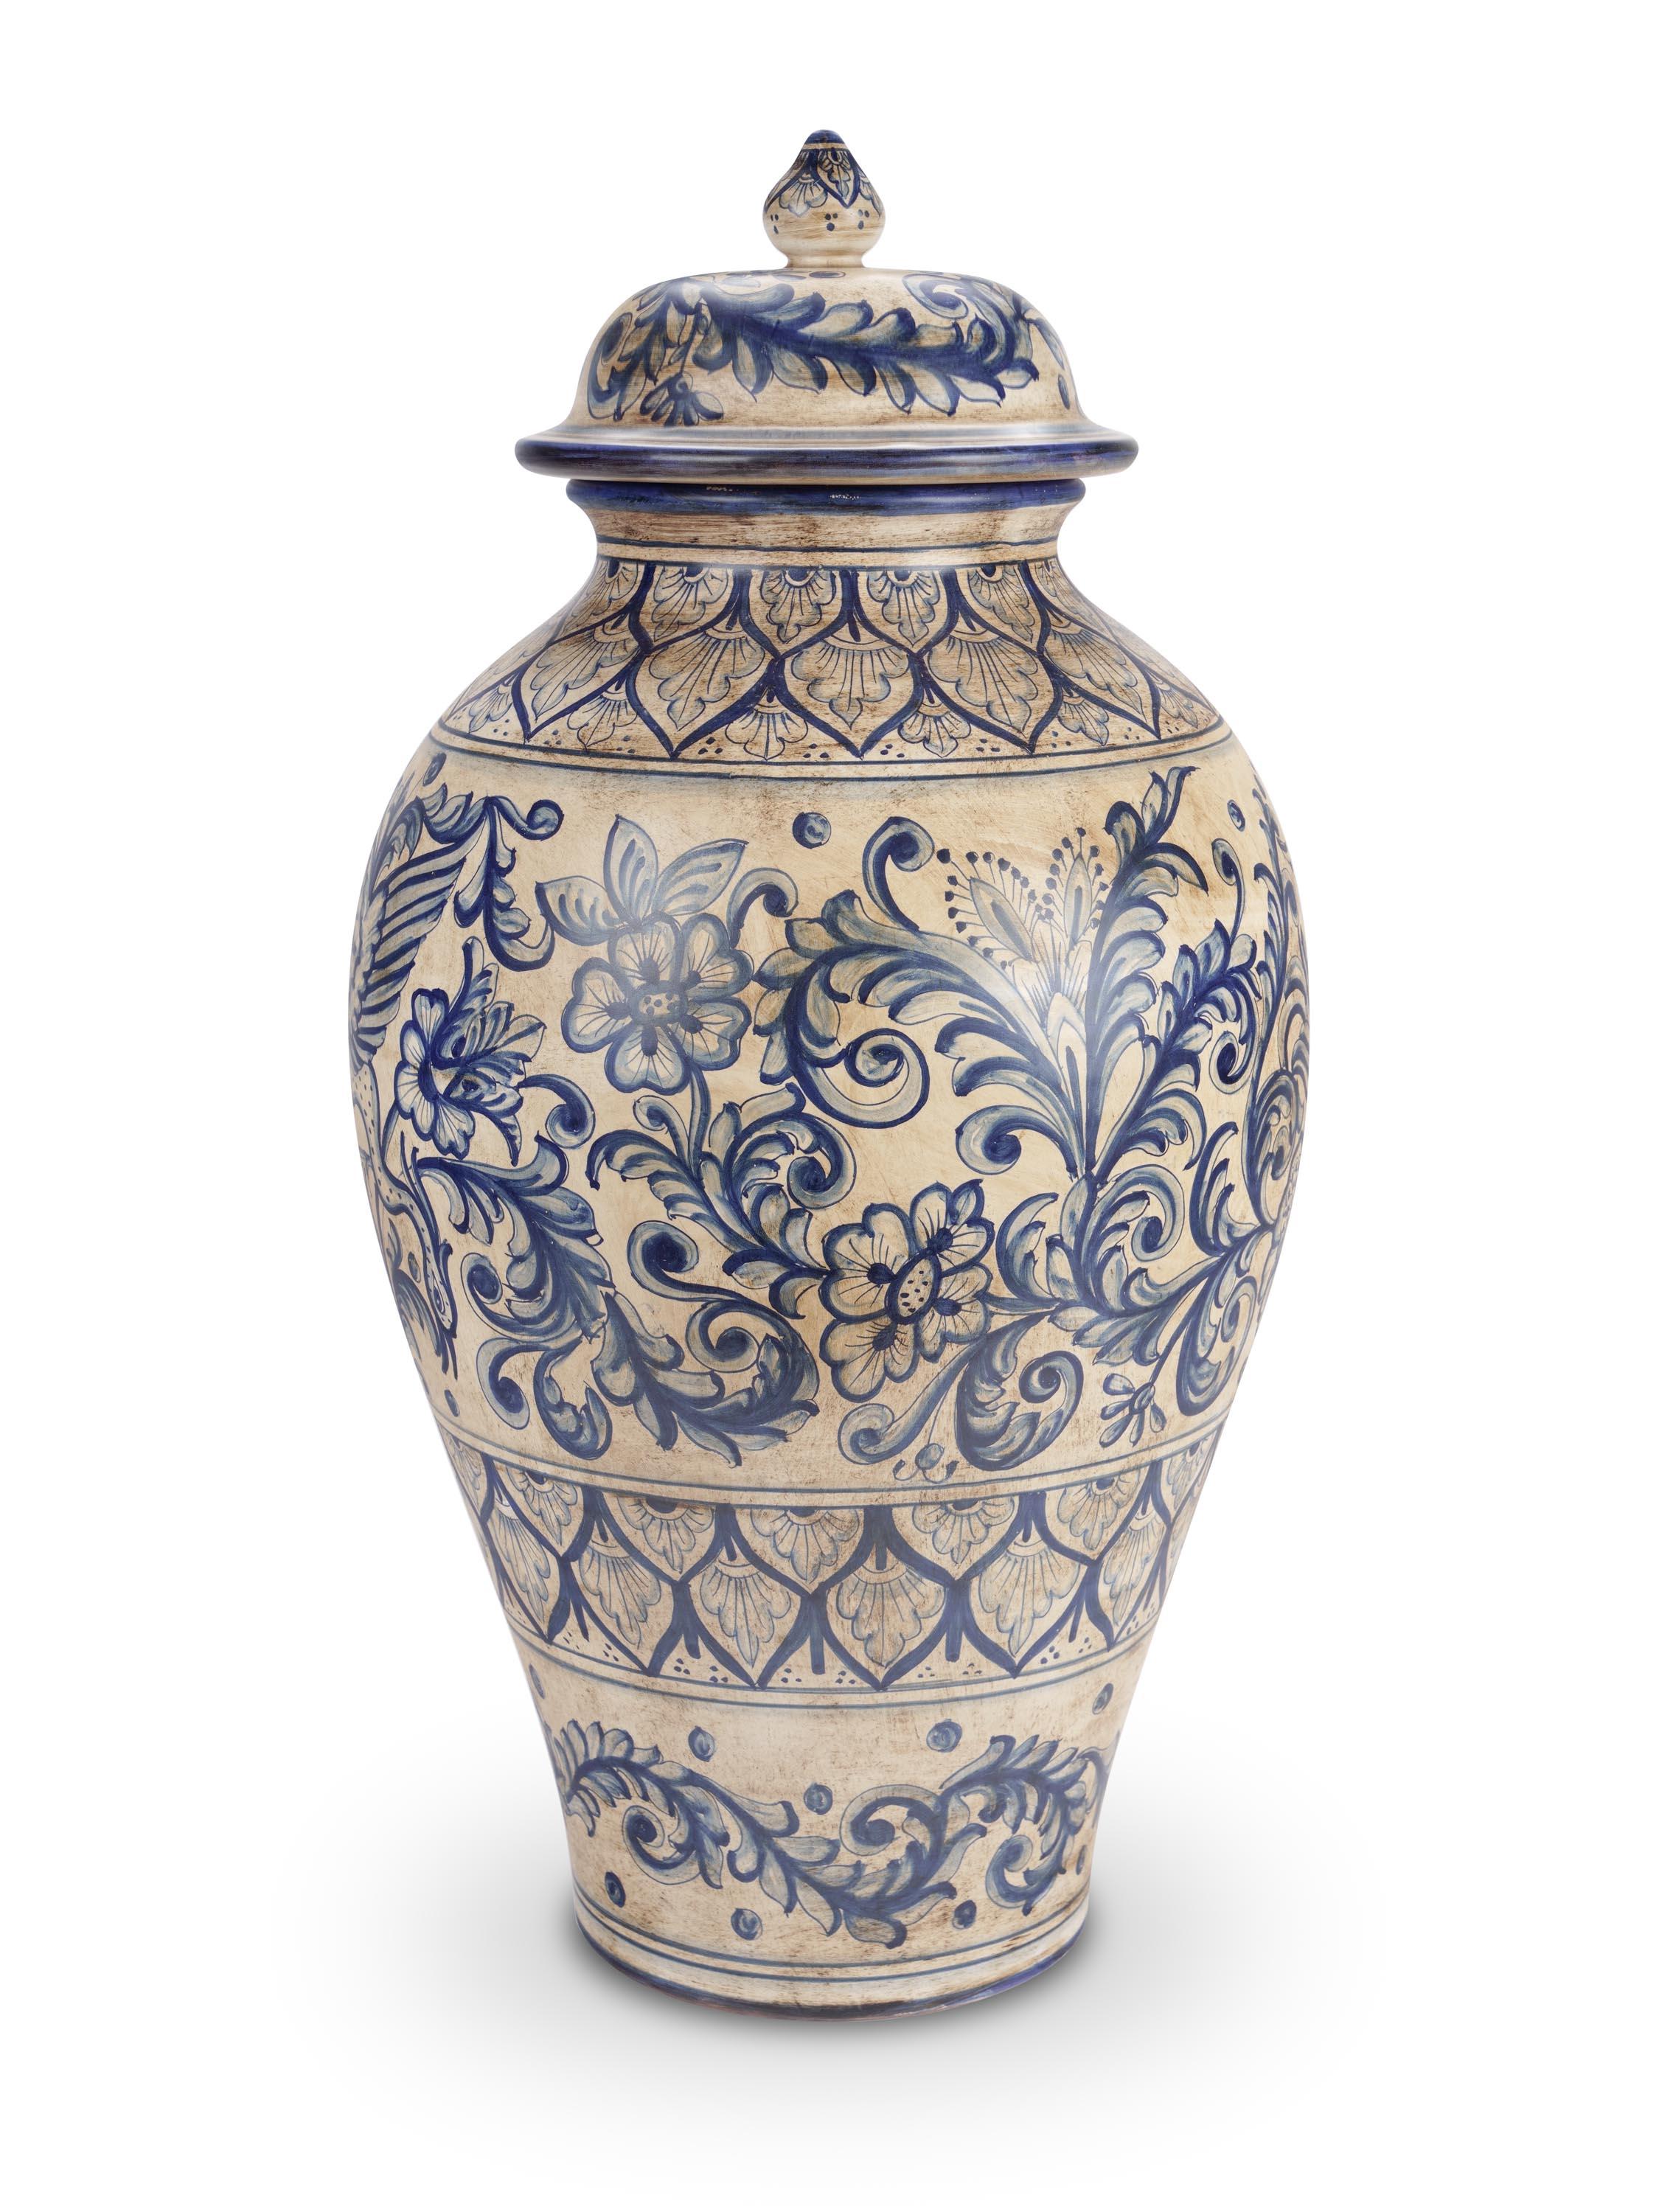 This splendid potiche vase is handmade and hand-painted in Italy: it is decorated with peacocks, known as symbols of resurrection and eternal life, accompanied by a rich representation of floral motifs. The basic decorative texture is characterized